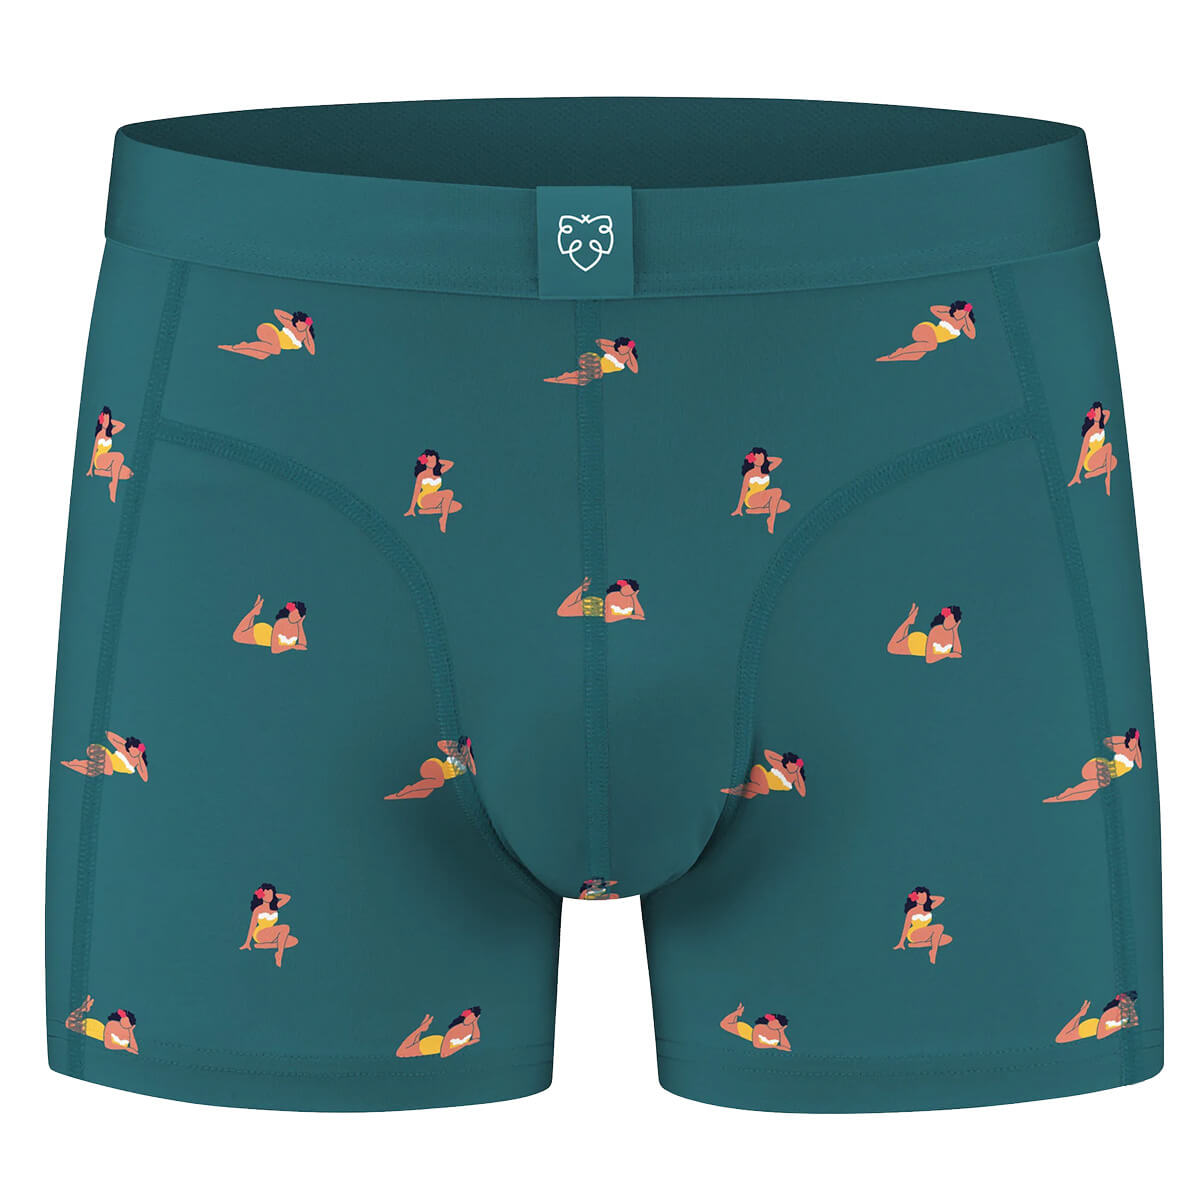 https://www.obsession-shop.com/images/thumbs/0800813_adam-hula-girl-boxer-briefs-assorted-m.jpeg